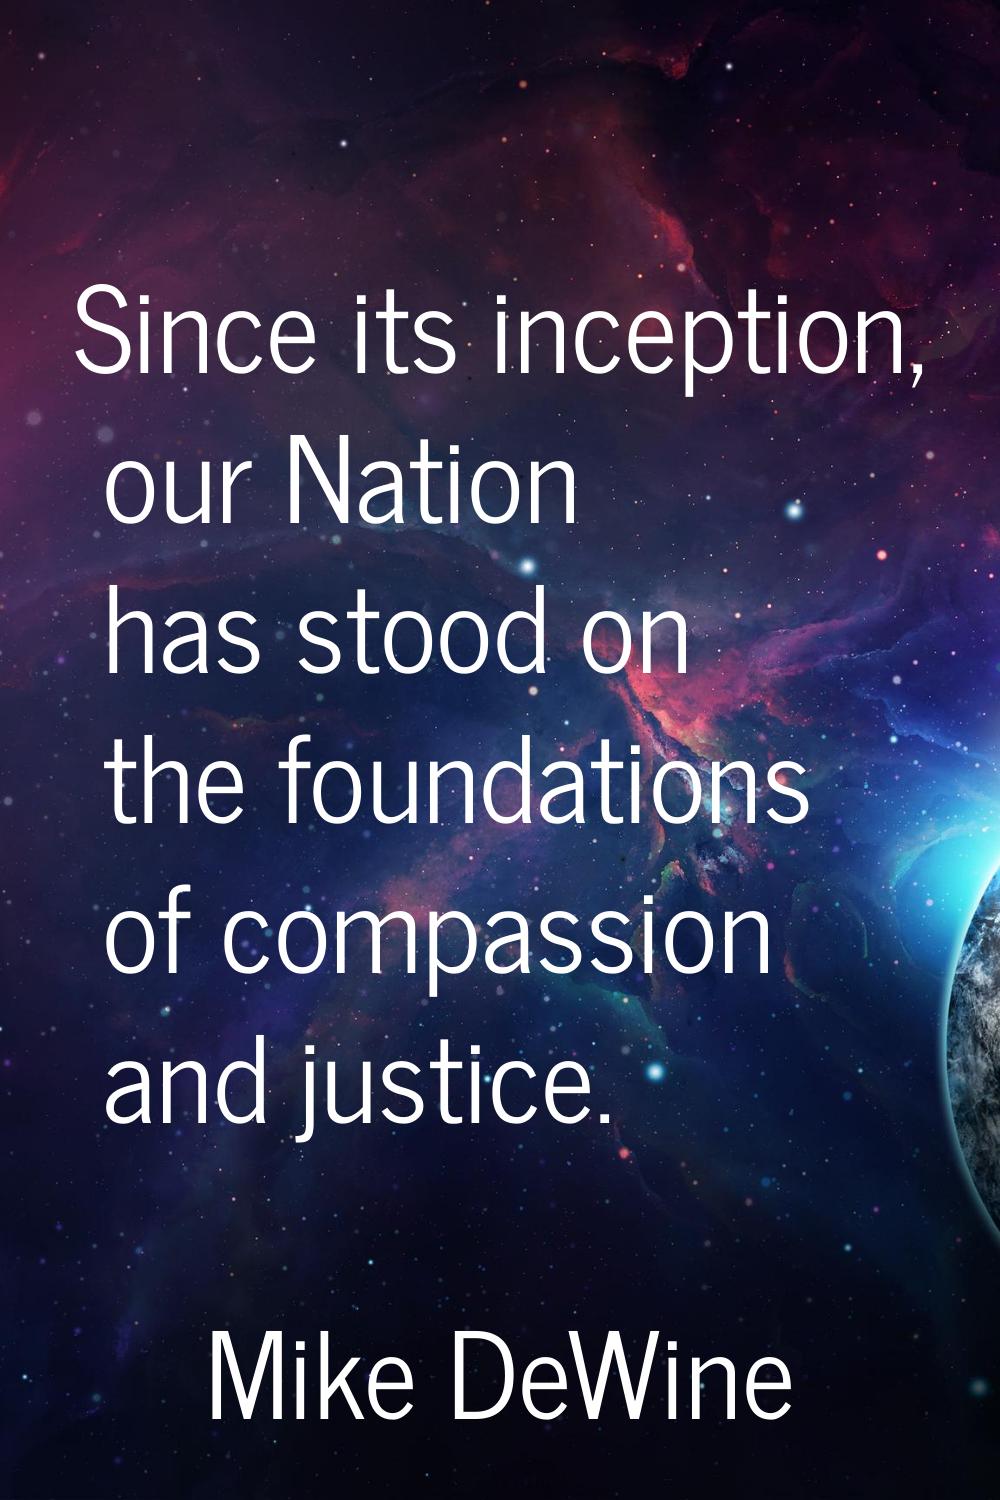 Since its inception, our Nation has stood on the foundations of compassion and justice.